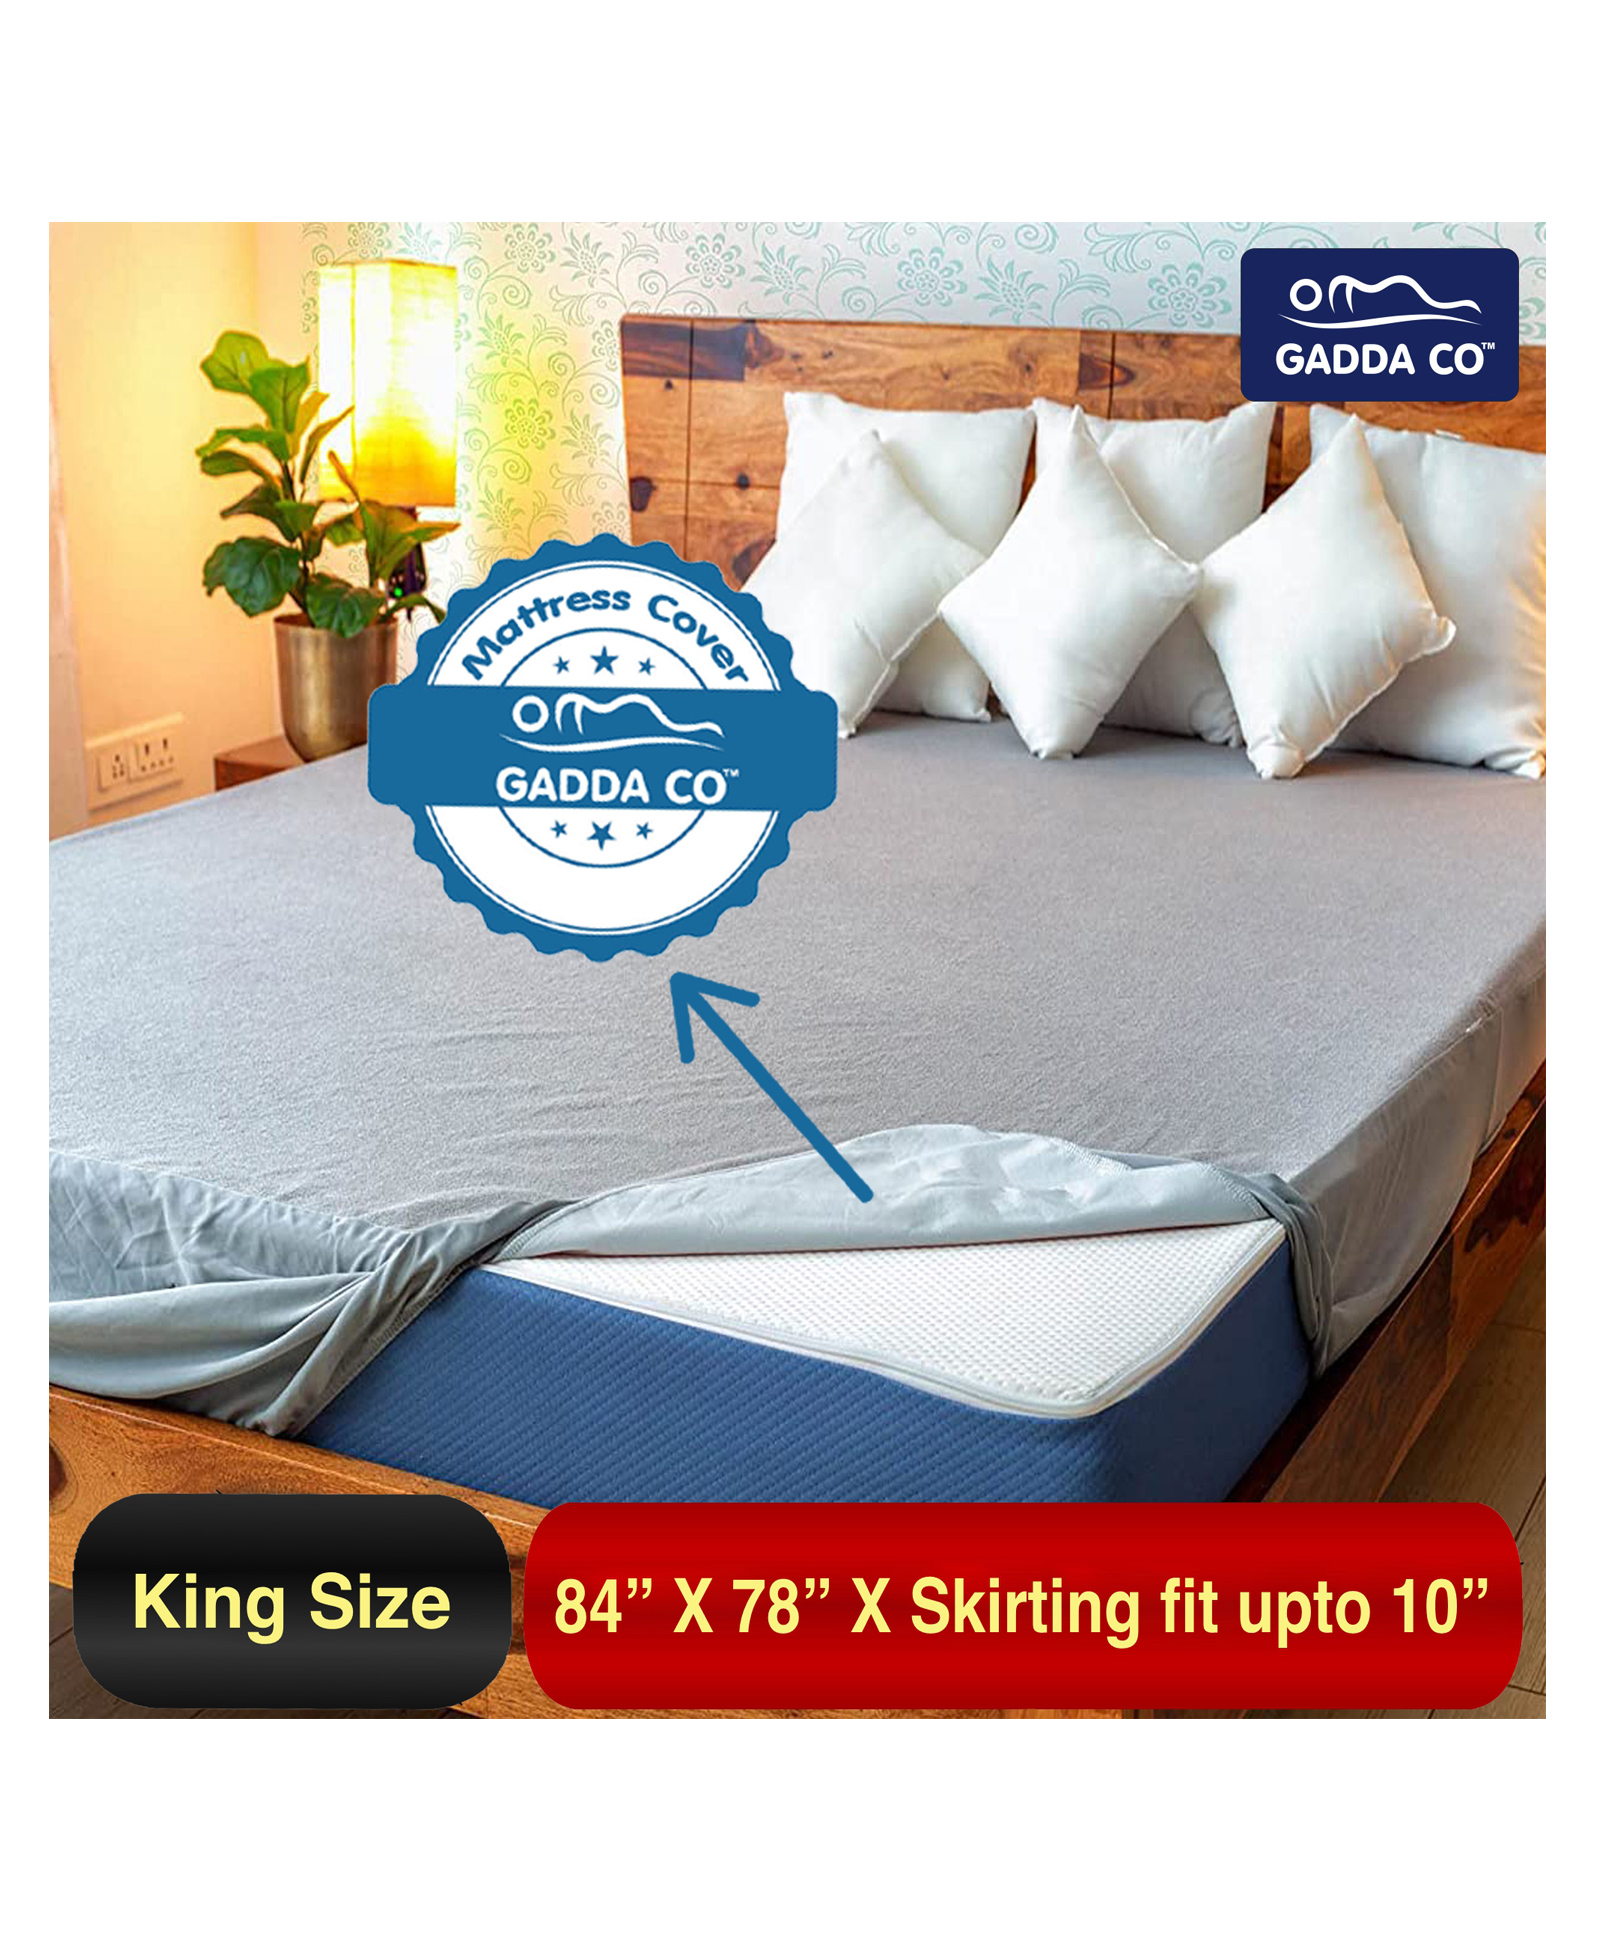 systematisch Geplooid Meting GADDA CO Waterproof 215 GSM Double Bed Protector Mattress Cover - Grey  Online in India, Buy at Best Price from FirstCry.com - 13207220